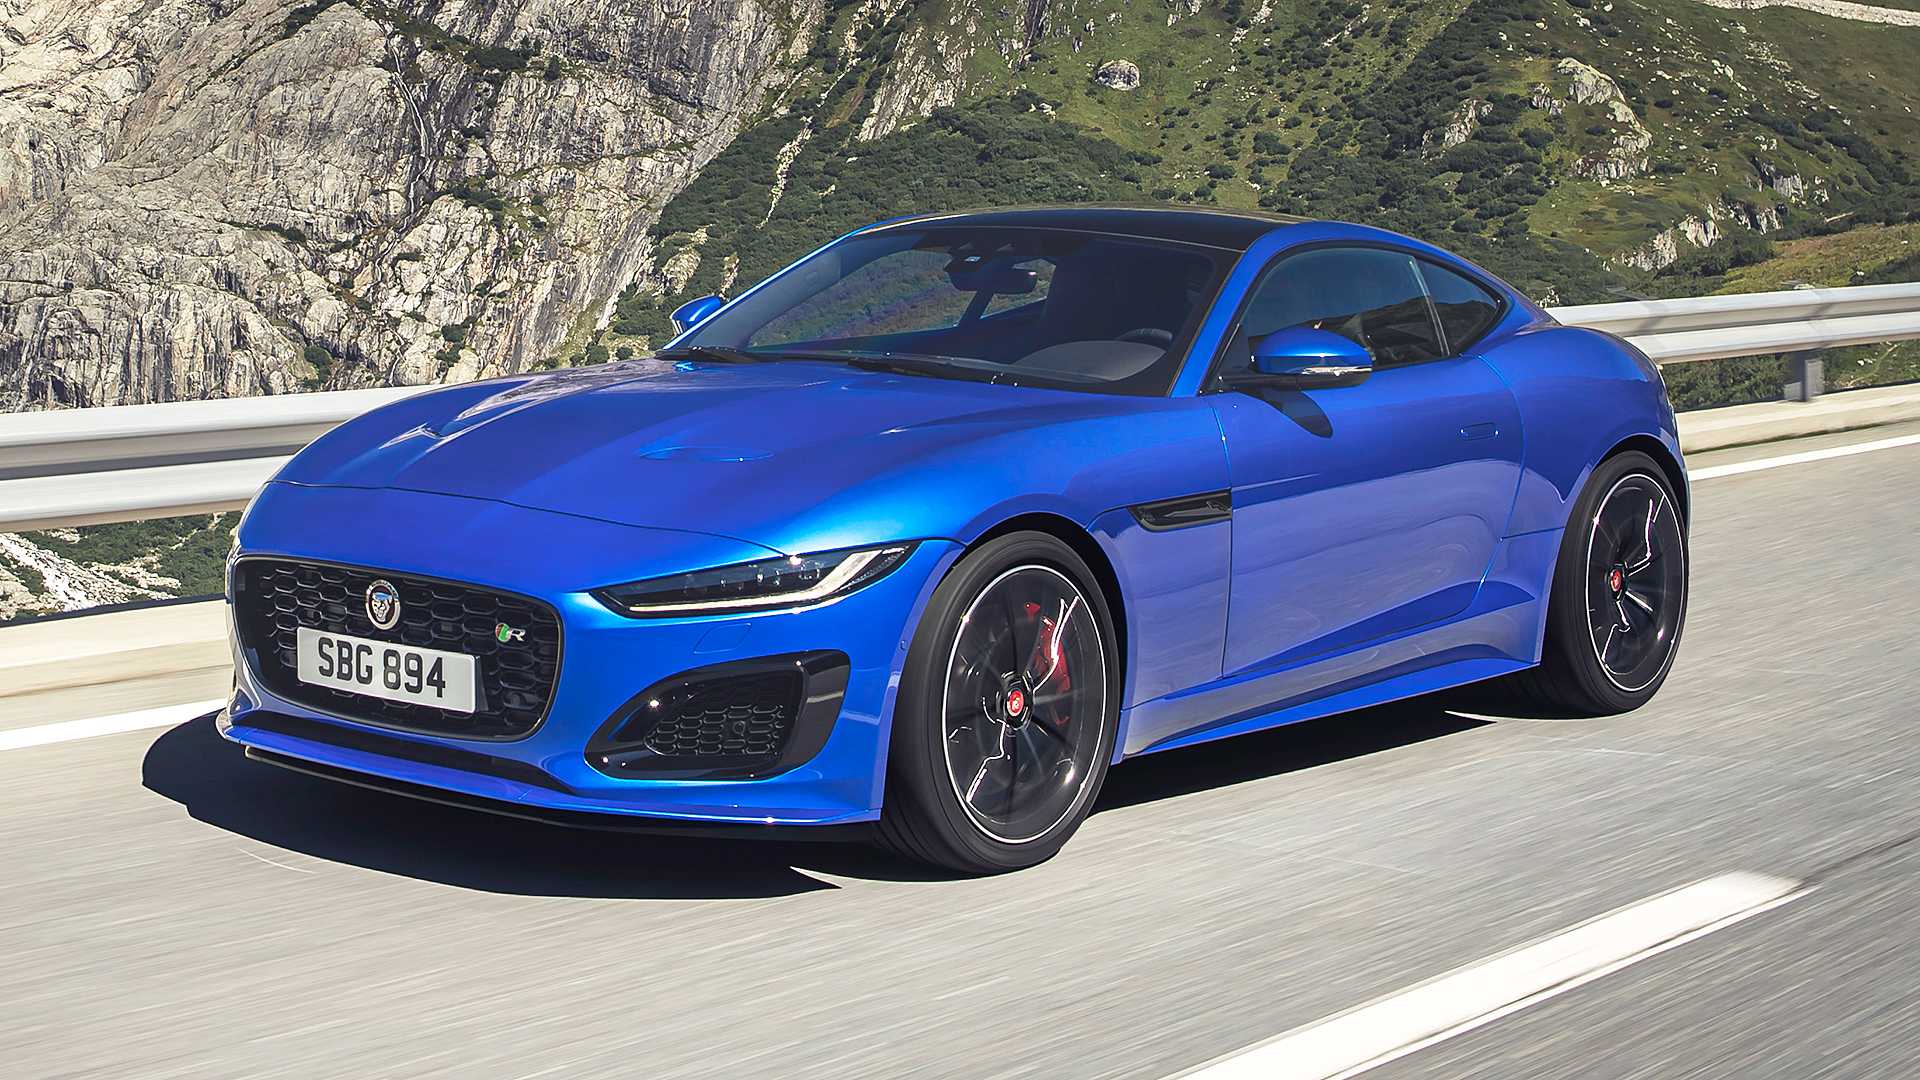 Jaguar F Type Debuts With Smoother Shape, New V8 Option